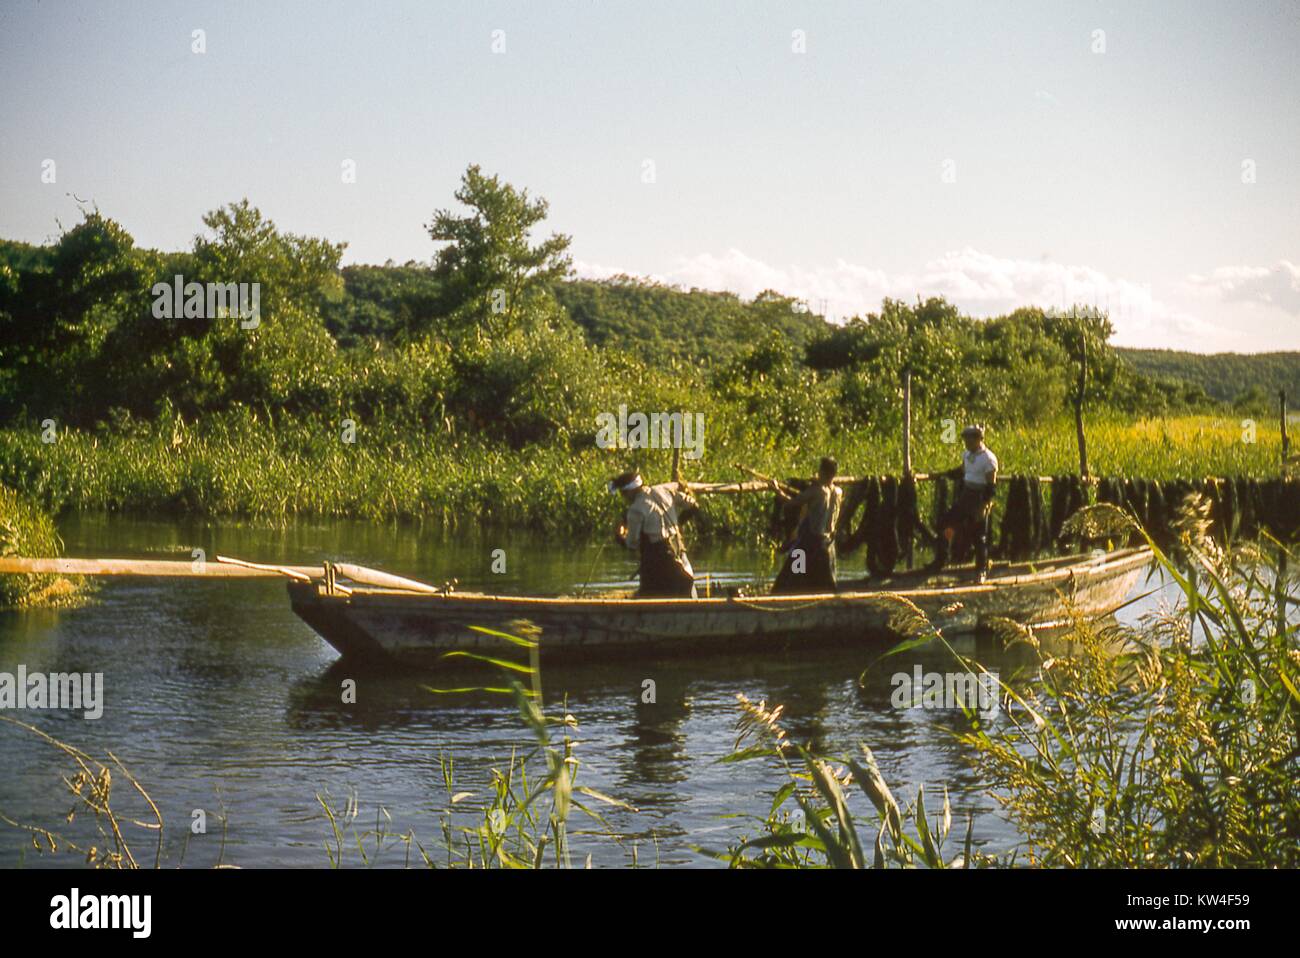 Japanese workers aboard a traditional boat fishing on a river, with foliage in the background, Japan, 1952. Stock Photo